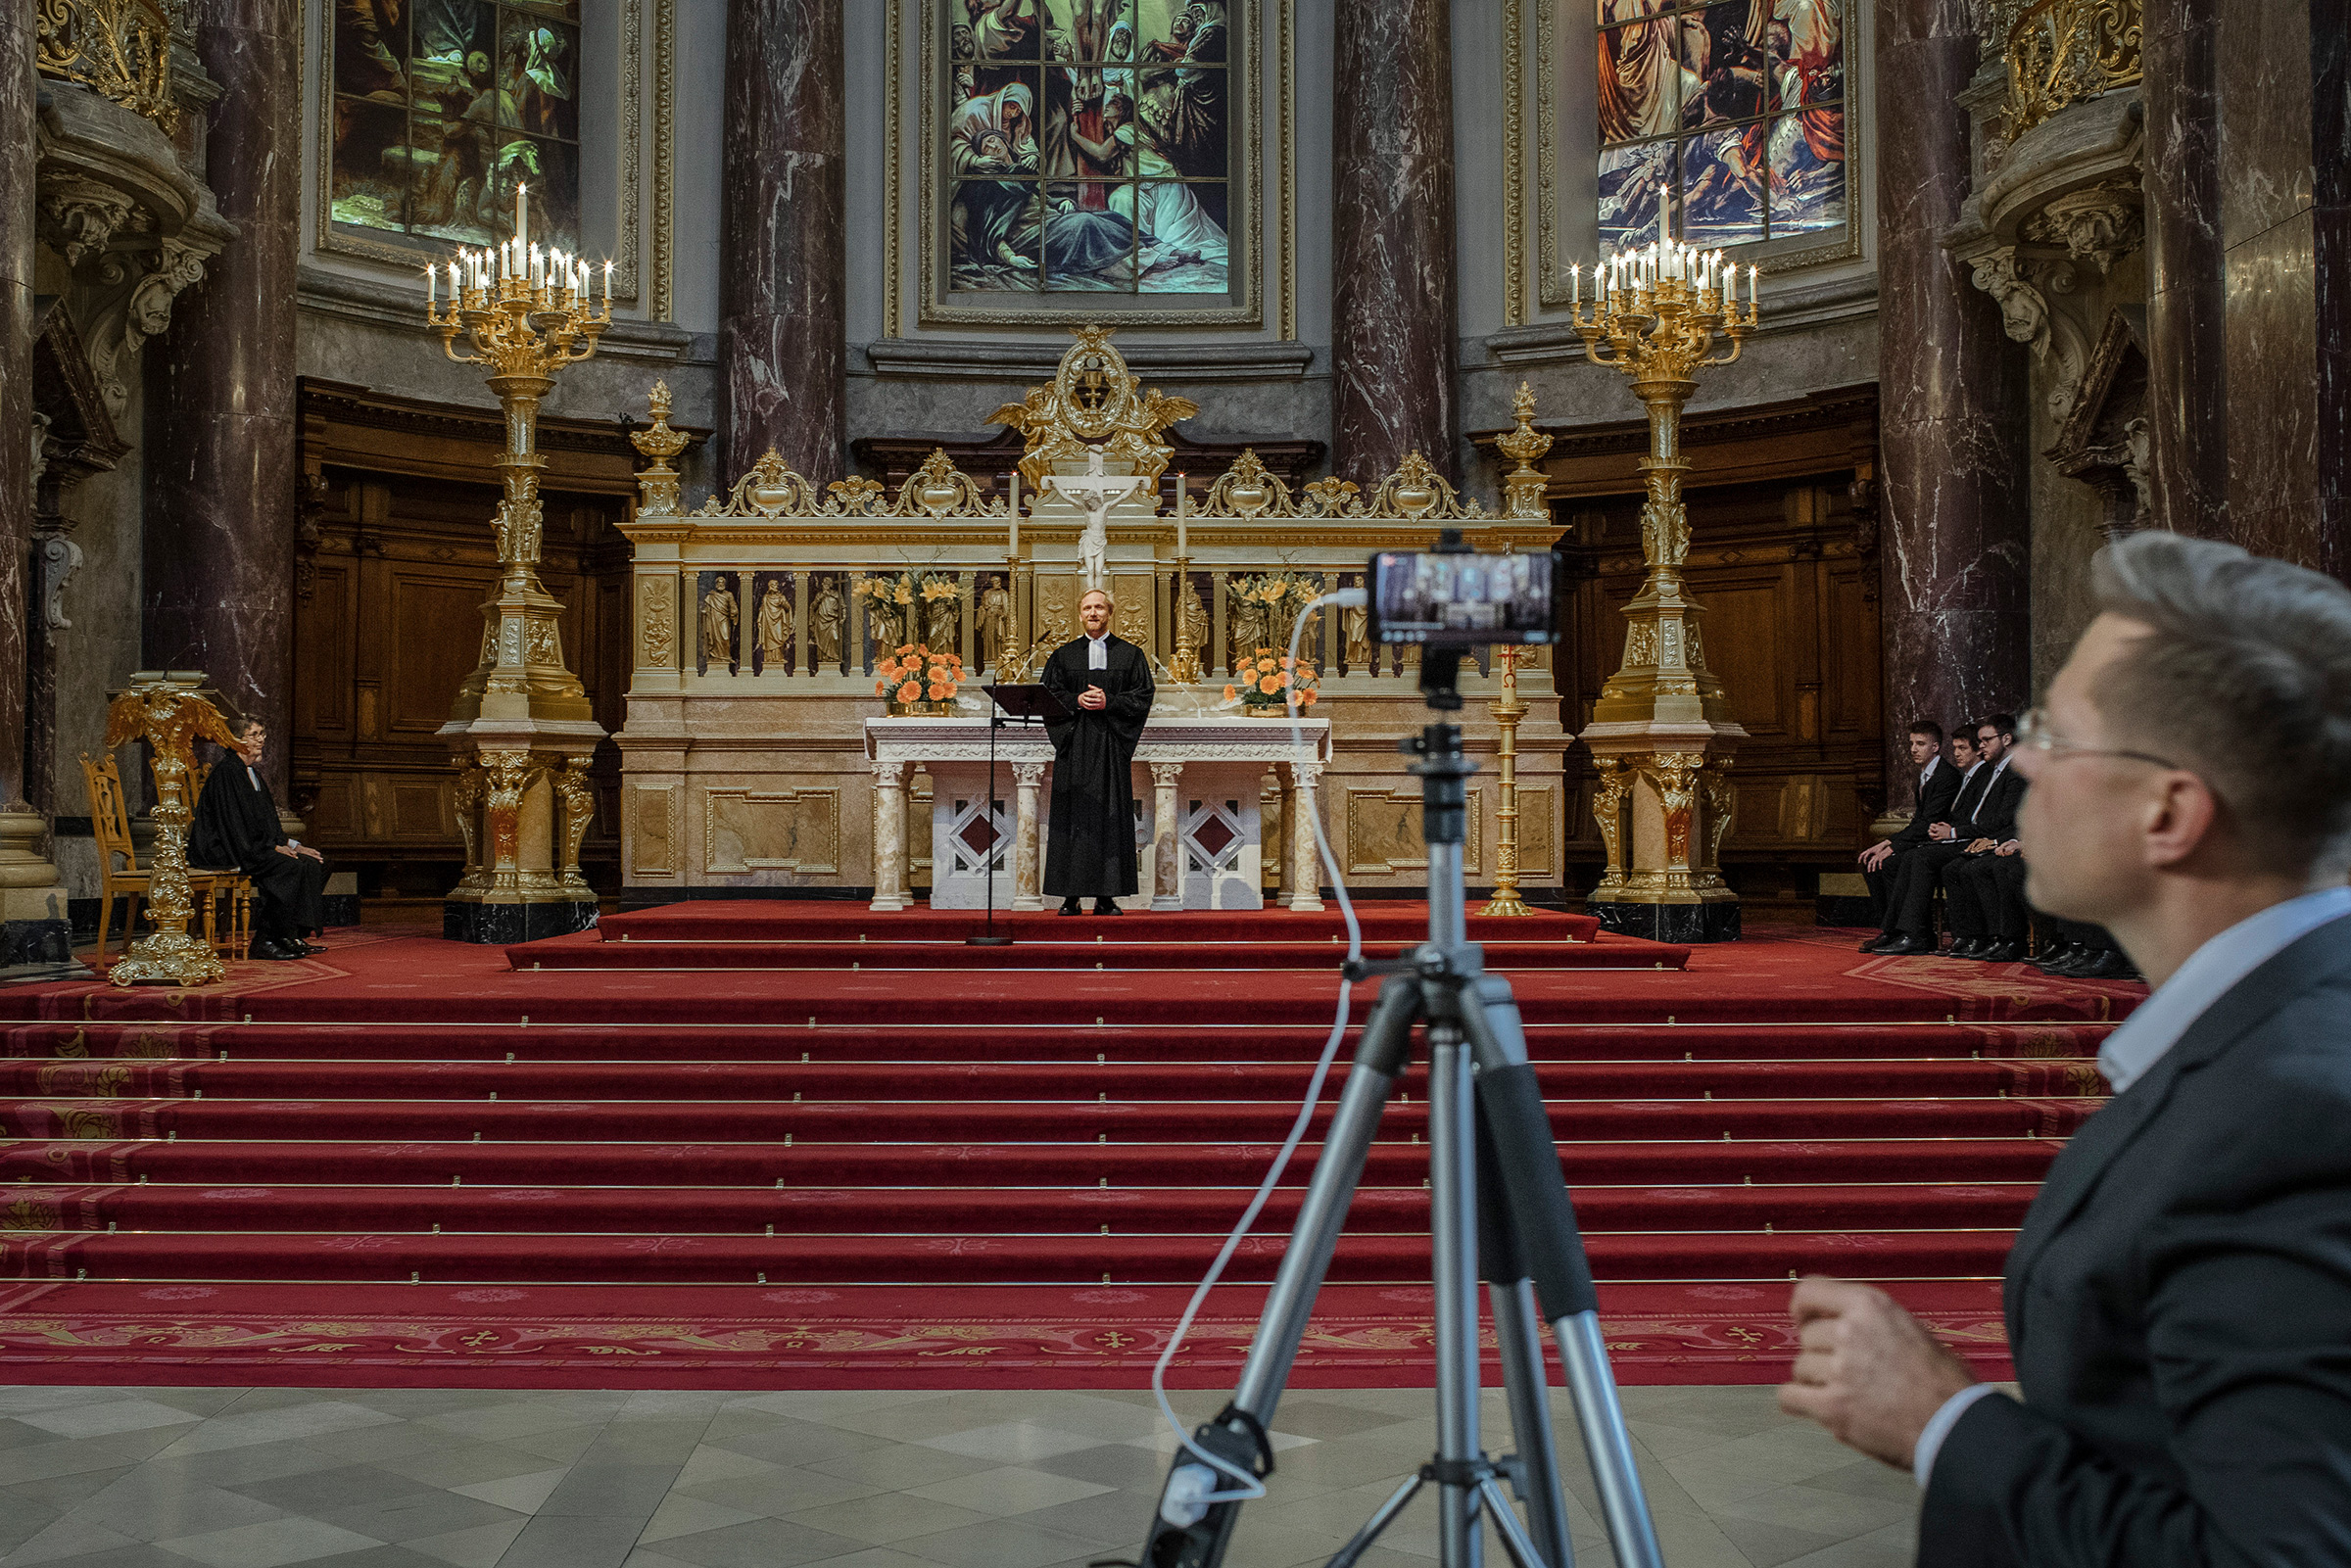 Service is live streamed from the Berlin Cathedral on March 15 as gatherings of more than 50 people were banned (Emile Ducke—The New York Times/Redux)